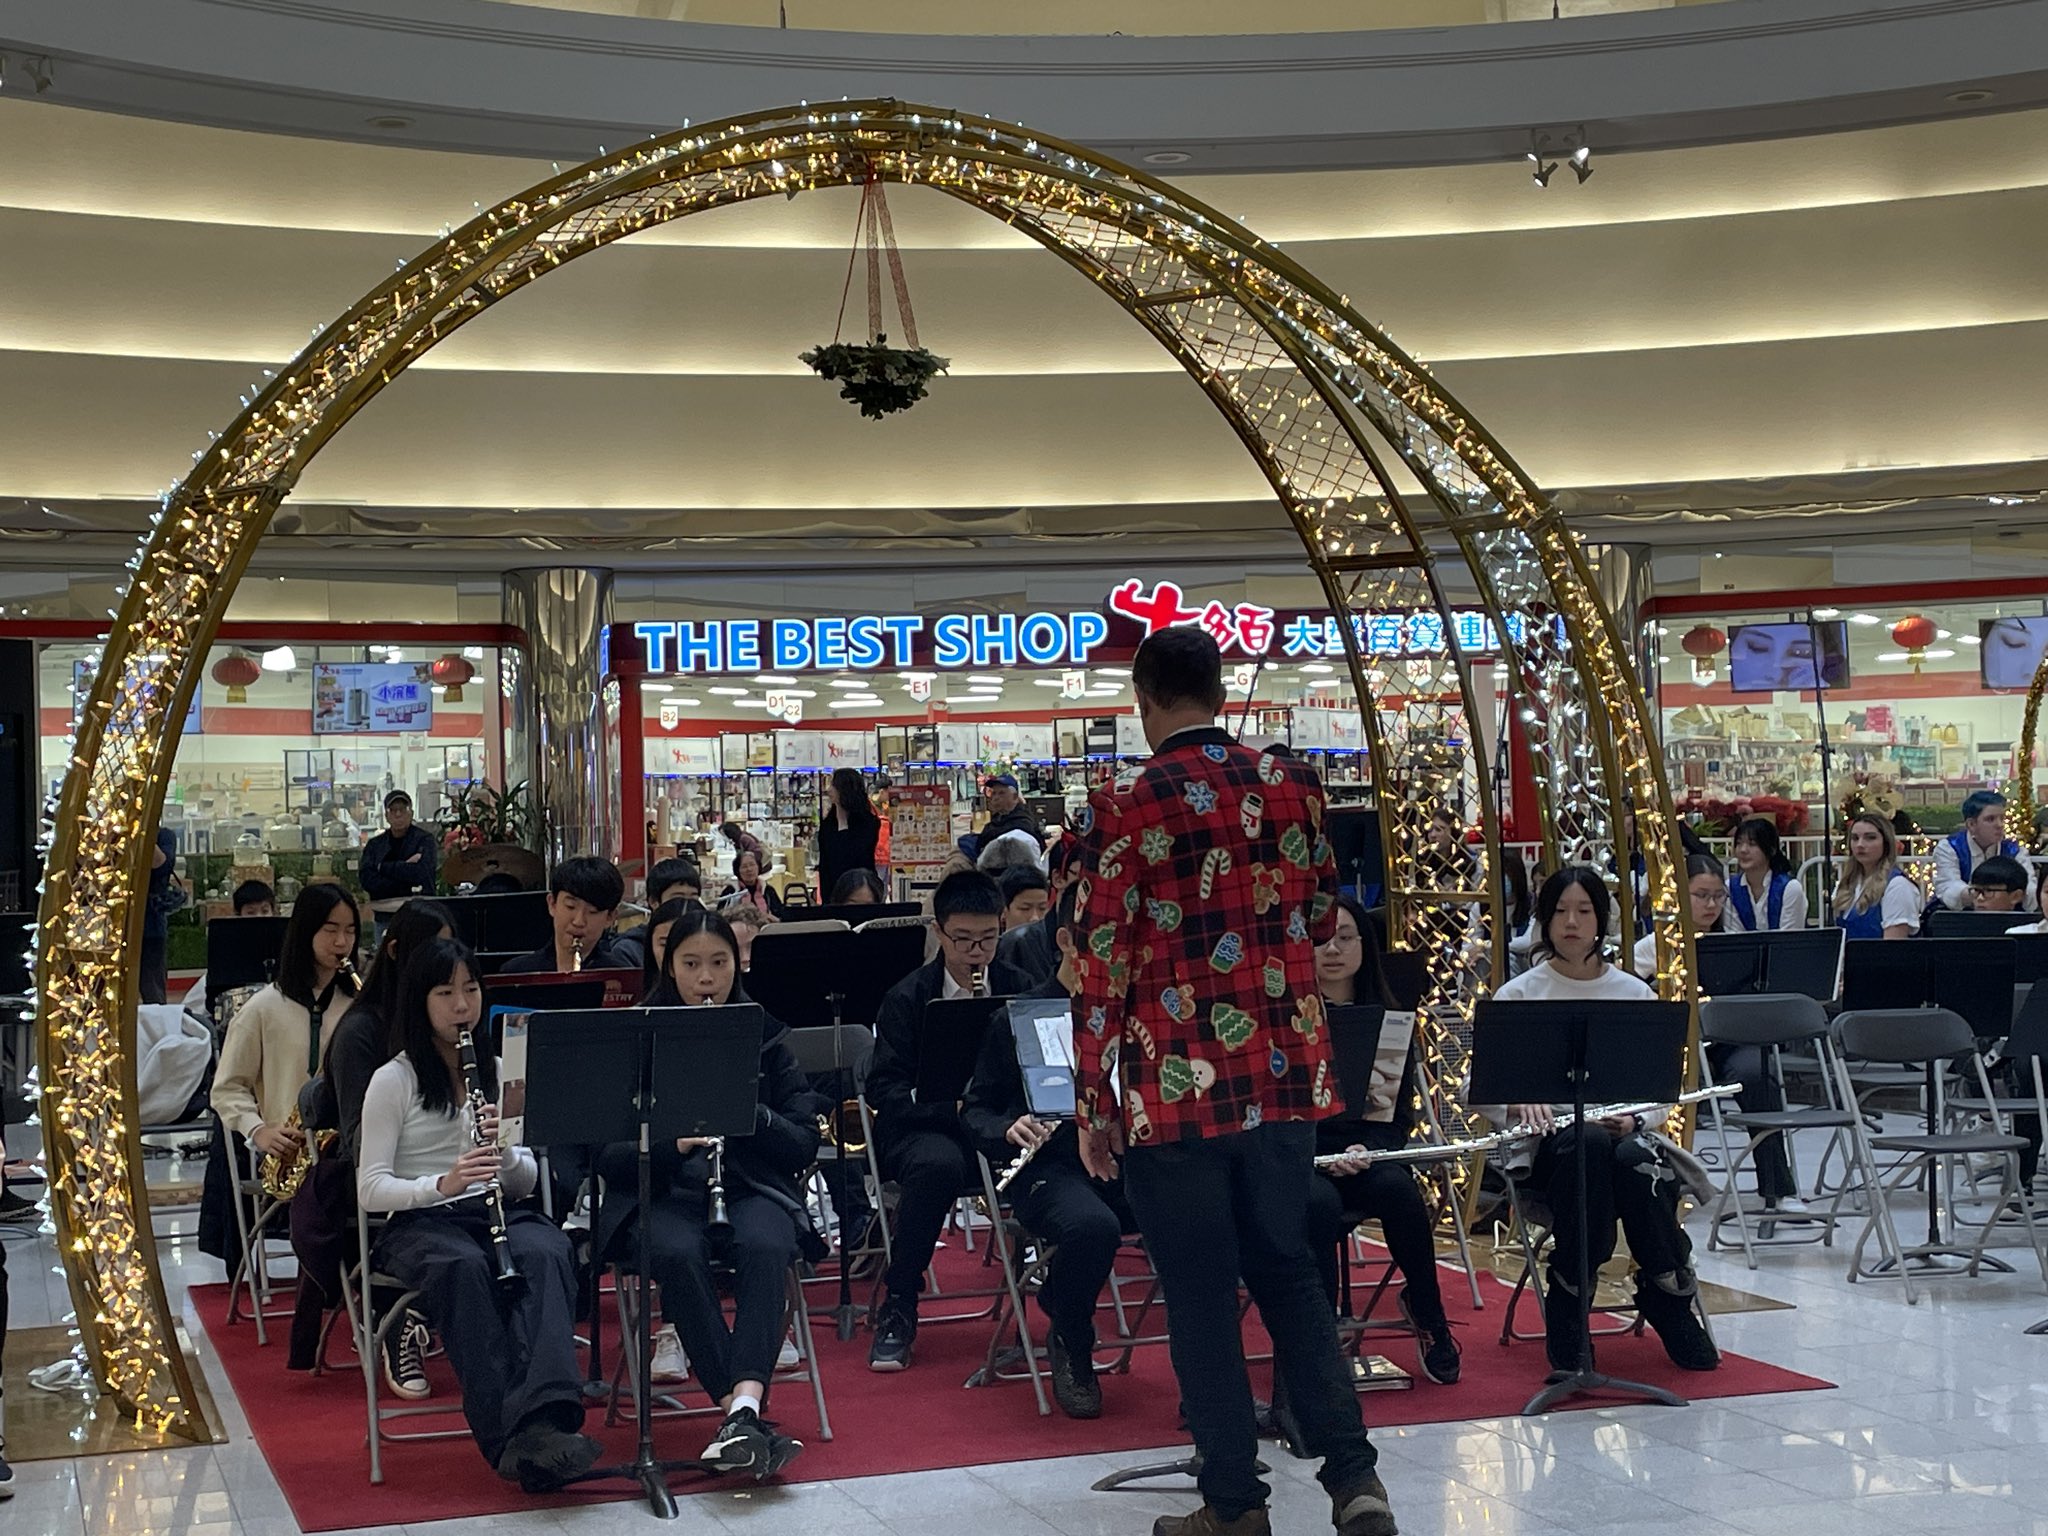 Students playing in a band concert inside a Richmond mall